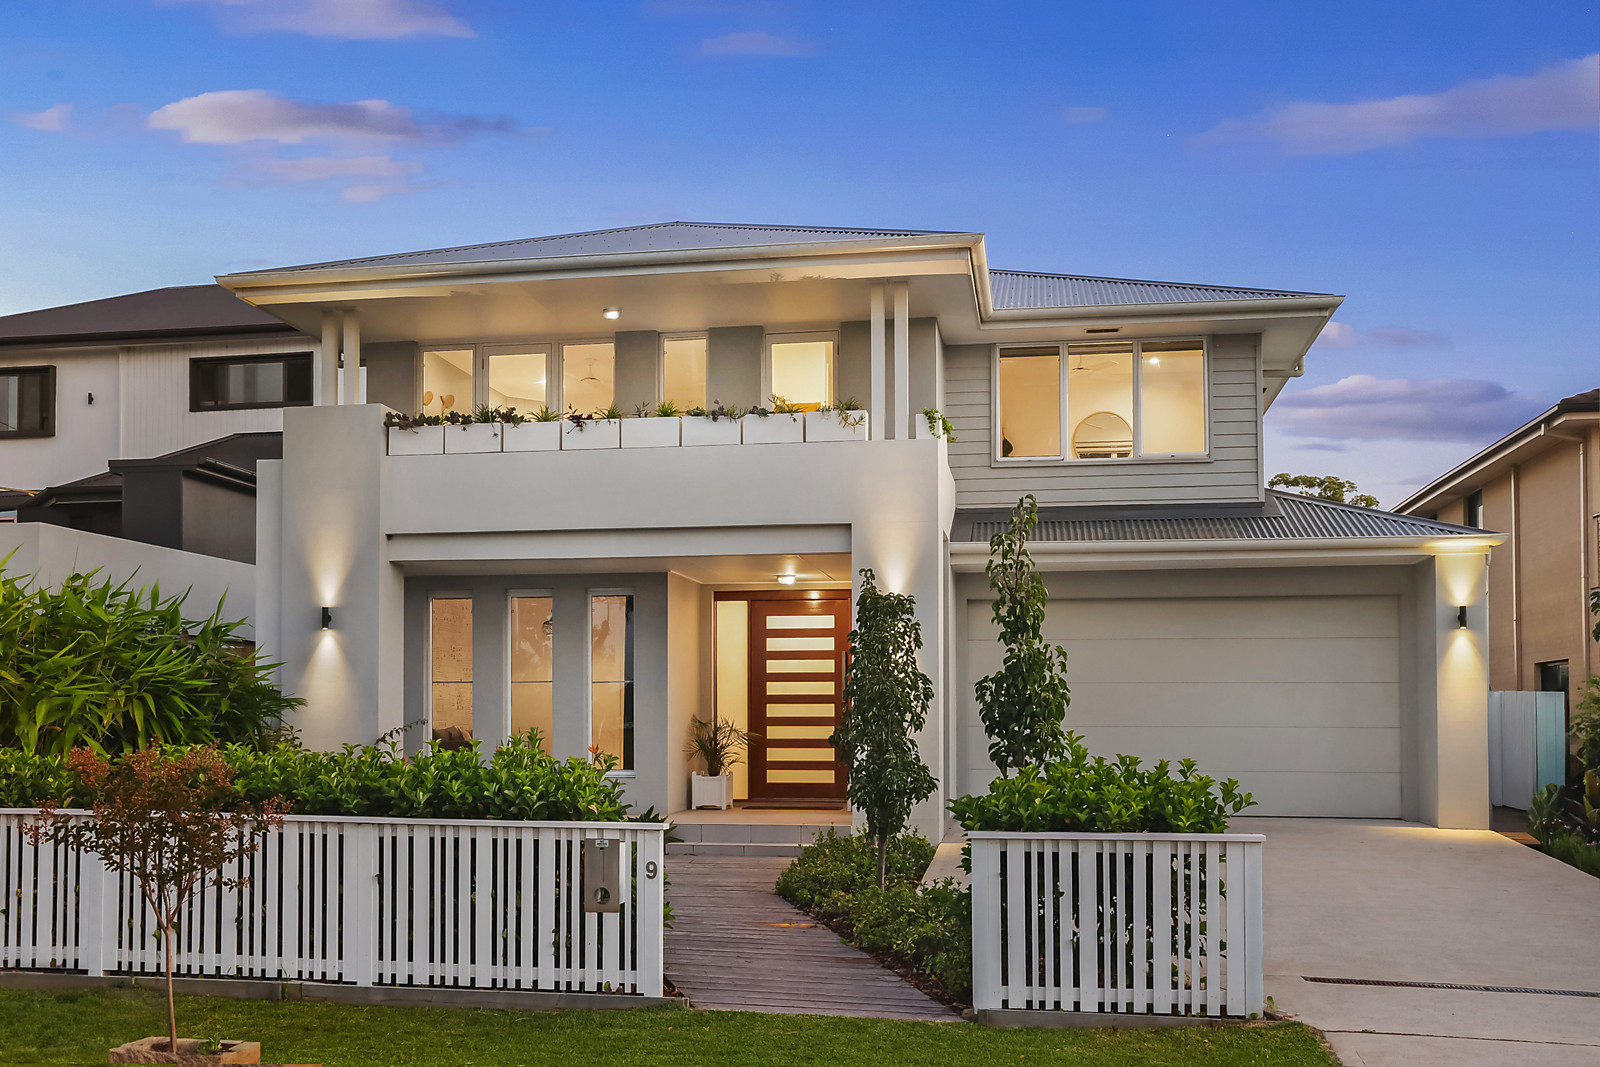 9 Mildred Avenue, Manly Vale featured